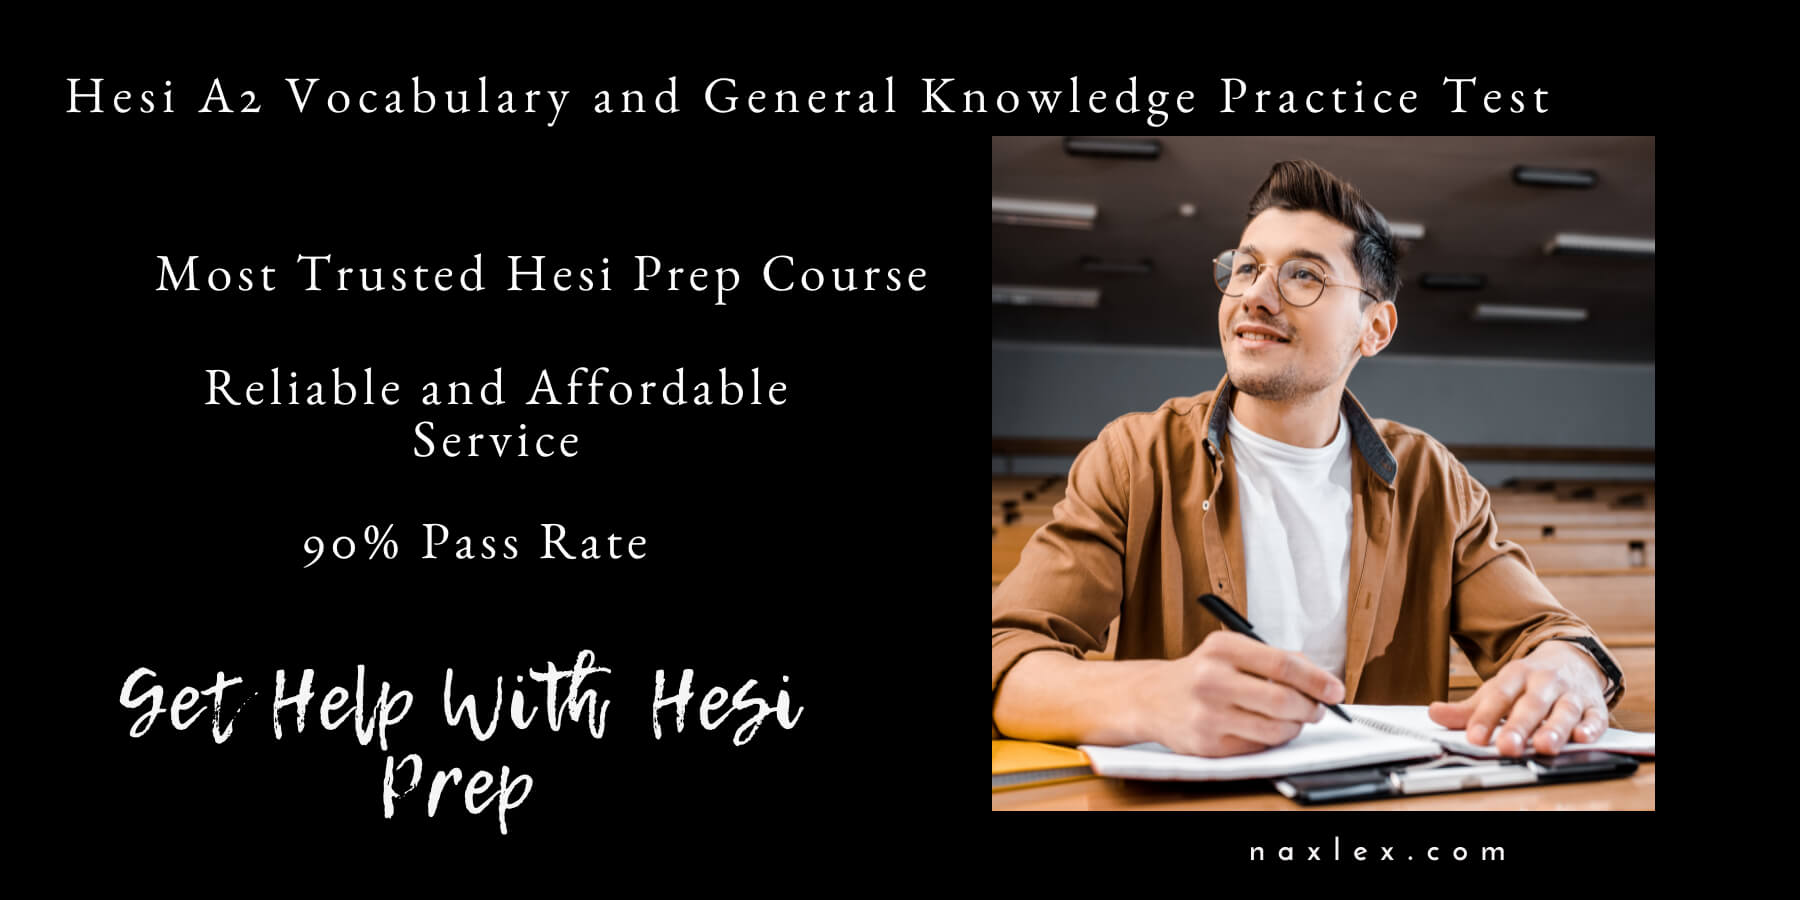 HESI-A2-Vocabulary-and-General-Knowledge-Practice-Test